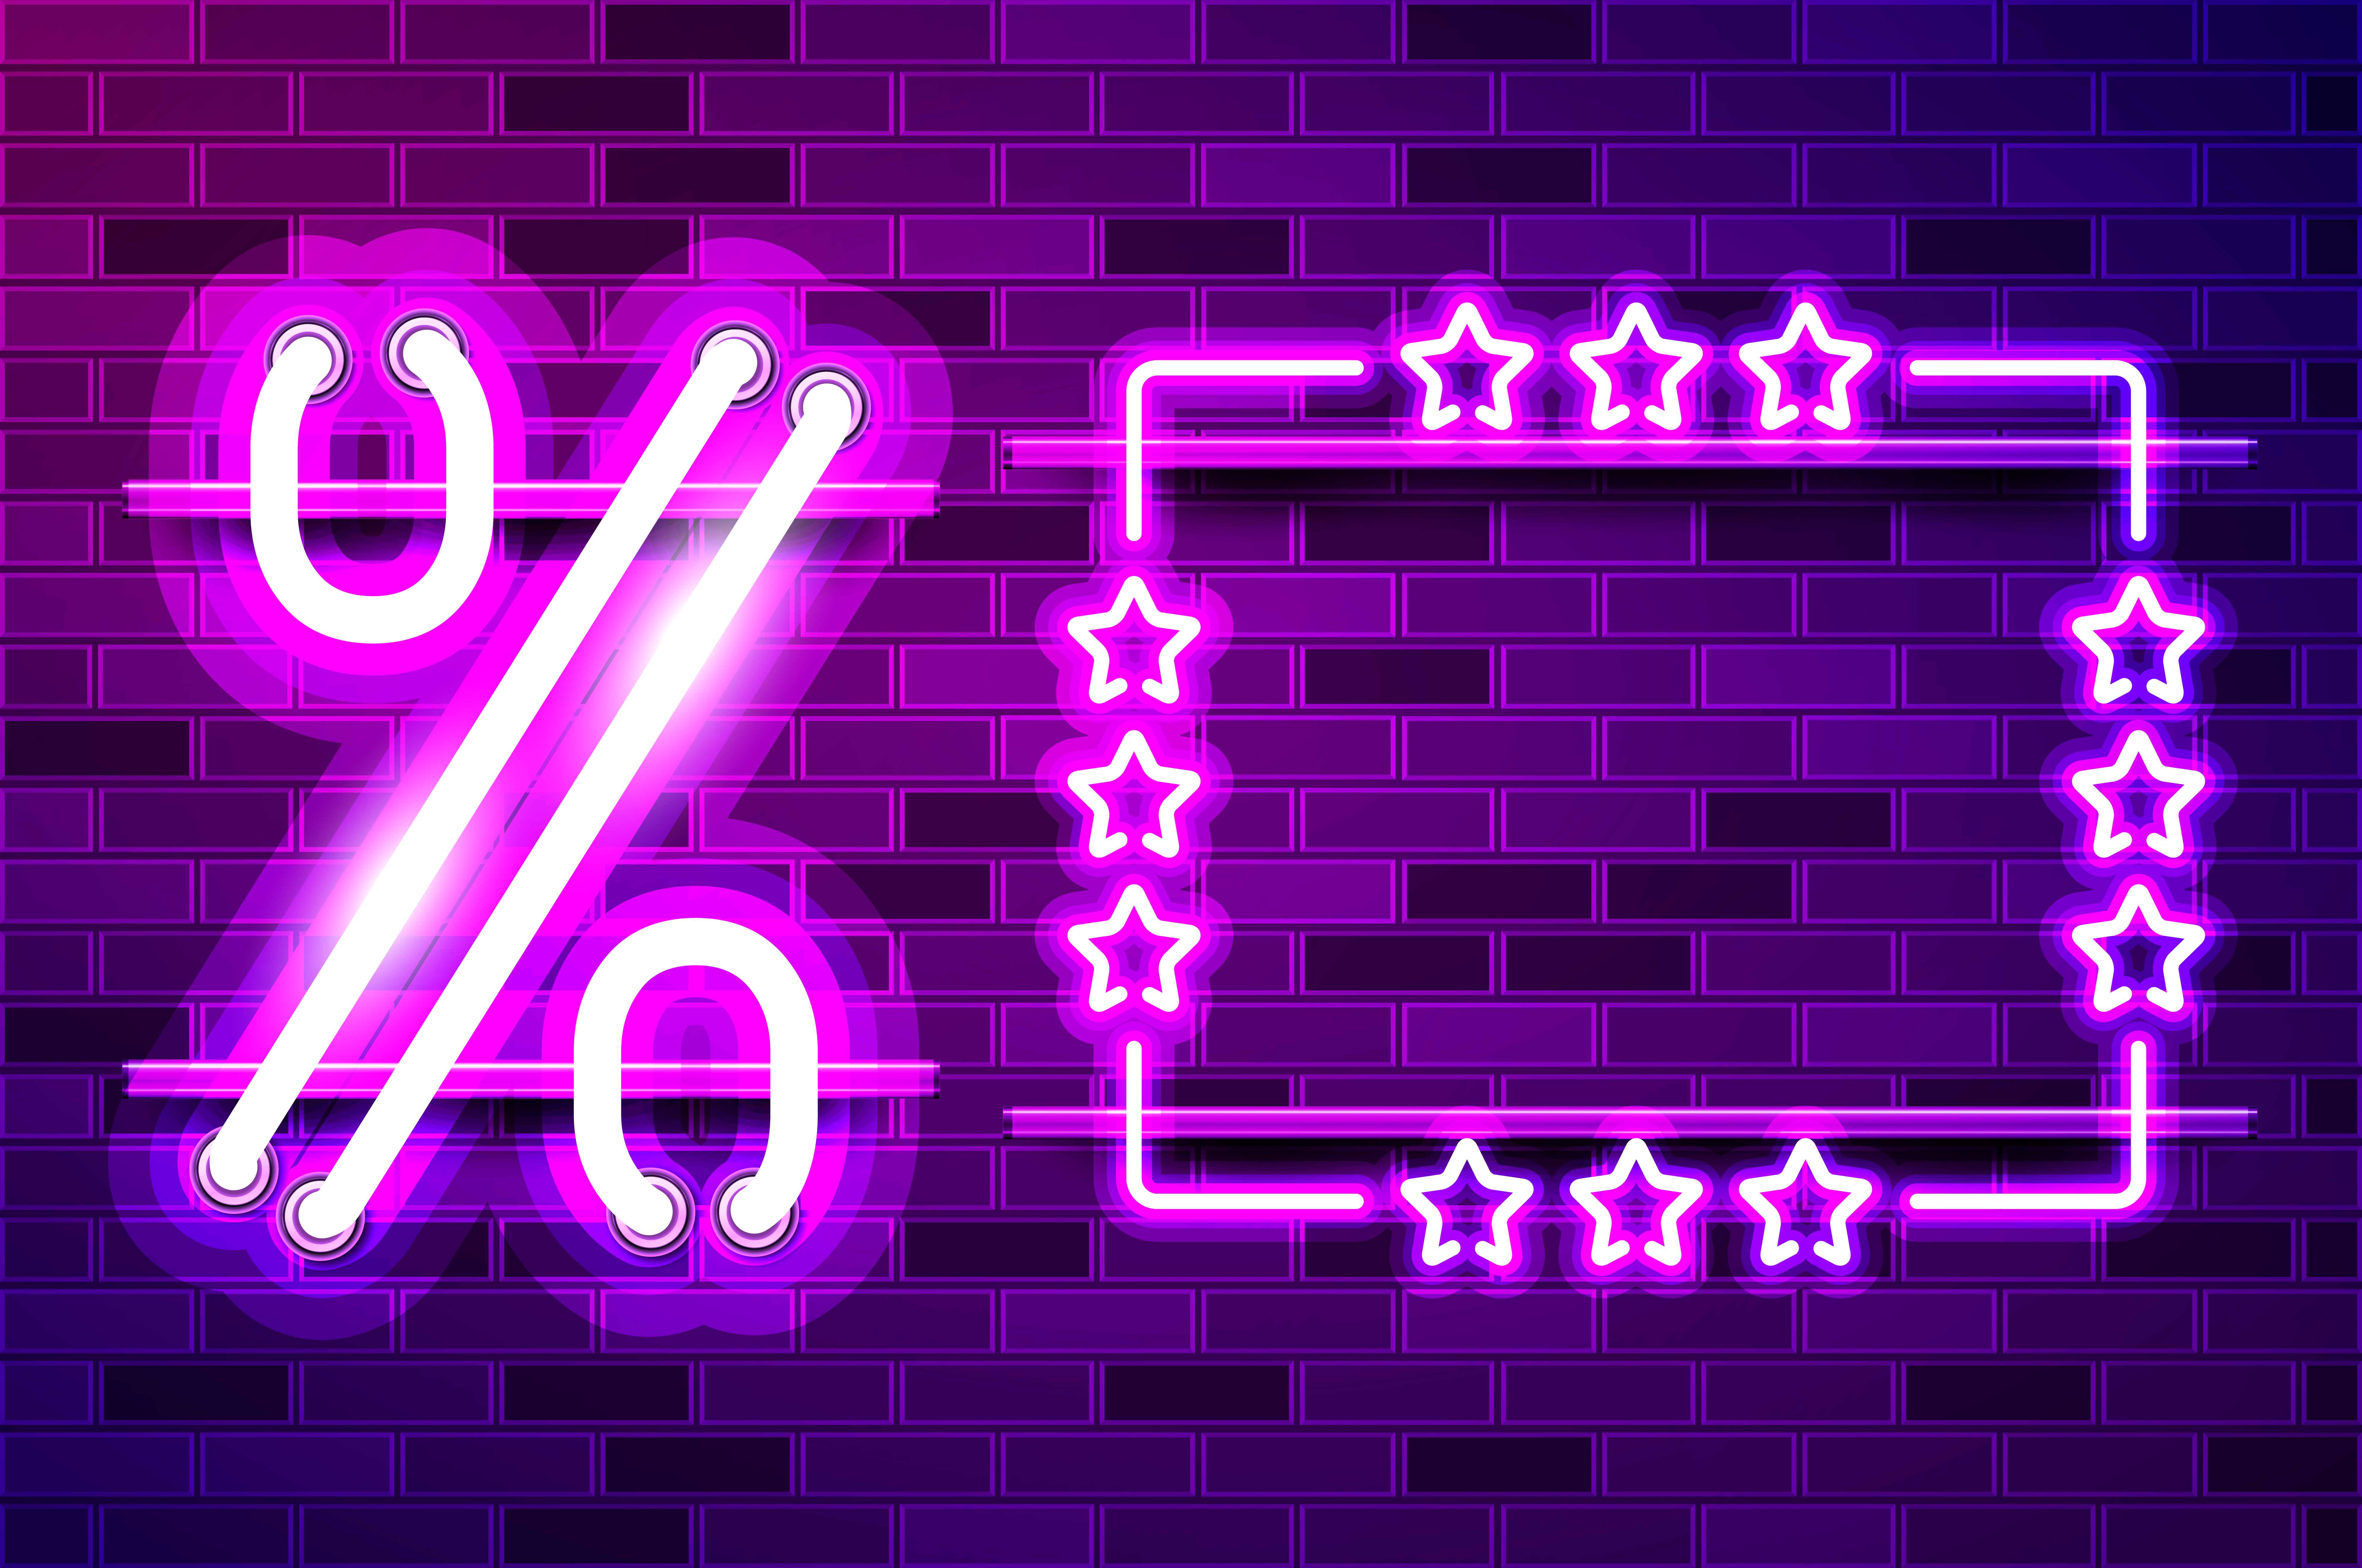 Large percent symbol with empty starred frame glowing neon lamp sign. Realistic vector illustration. Purple brick wall, violet glow, metal holders.. Large percent symbol with empty starred frame glowing purple neon lamp sign